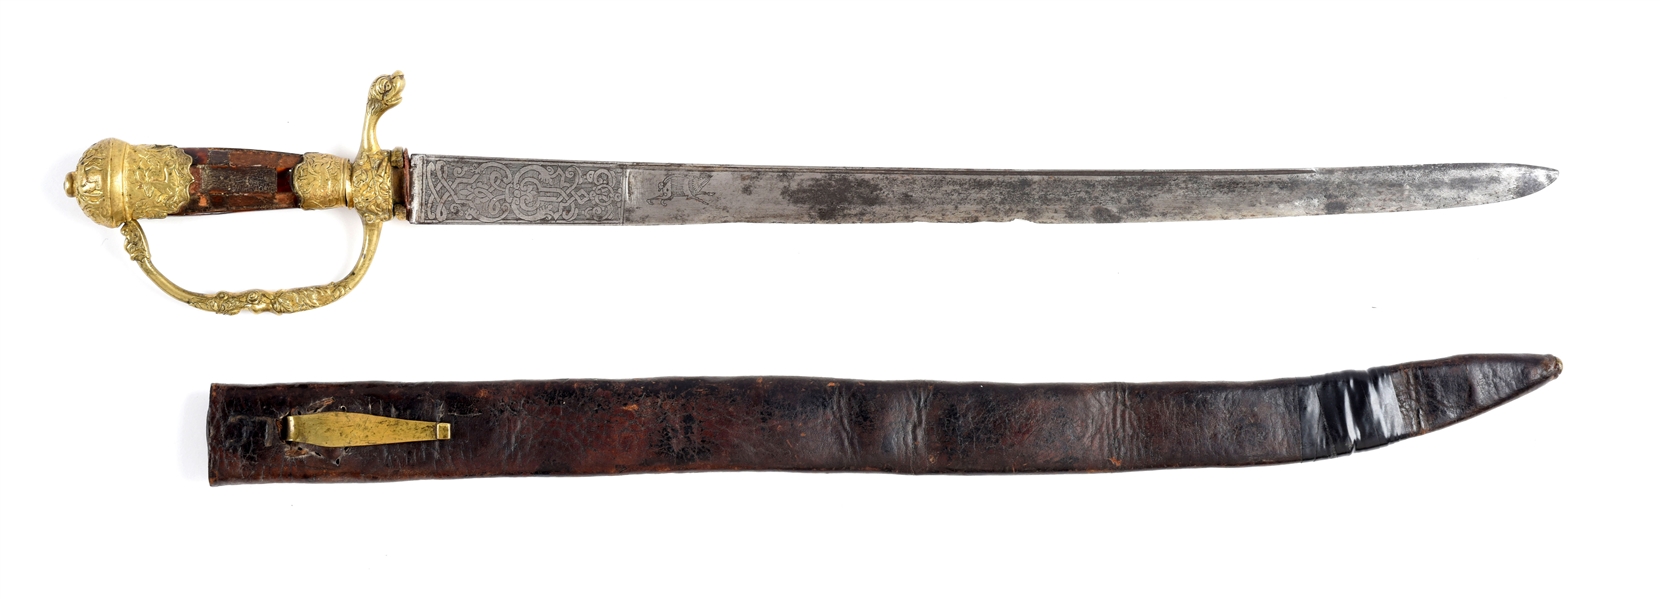 TORTOISE SHELL GRIPPED GERMAN HIRSCHFÄNGER HUNTING SWORD WITH SCABBARD.